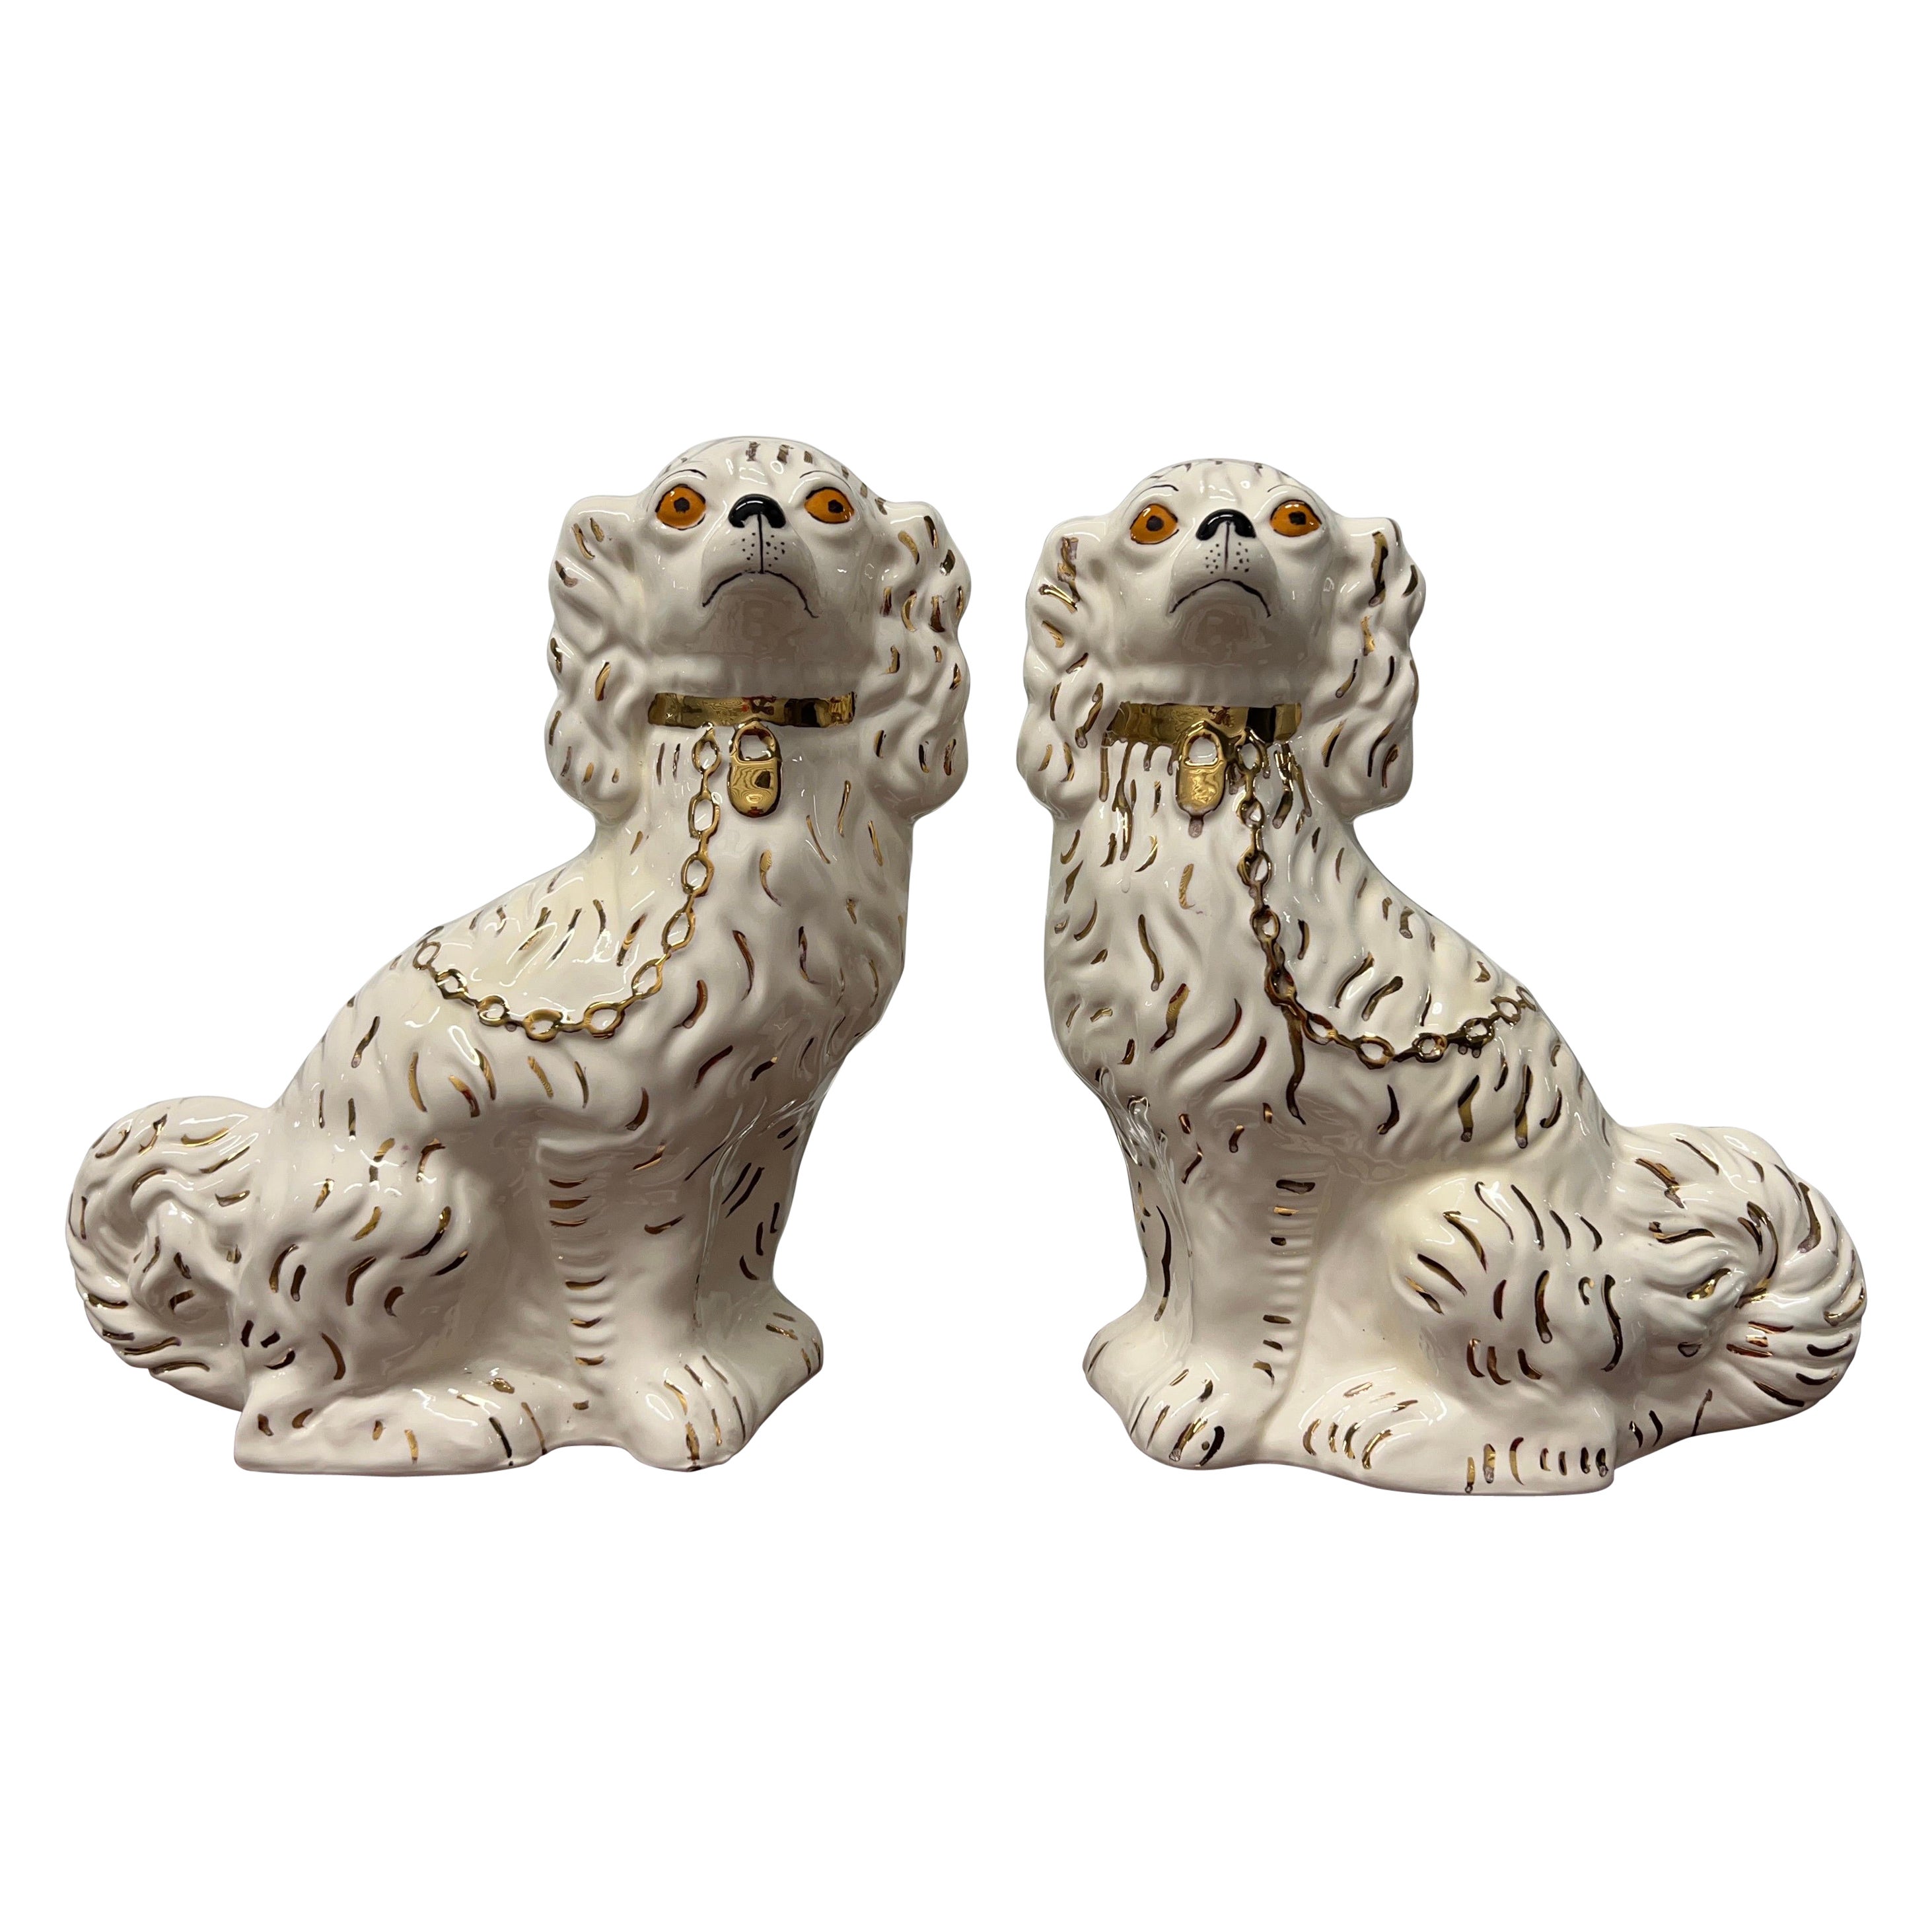 Vintage English Staffordshire Style Spaniel Dogs, White & Gold